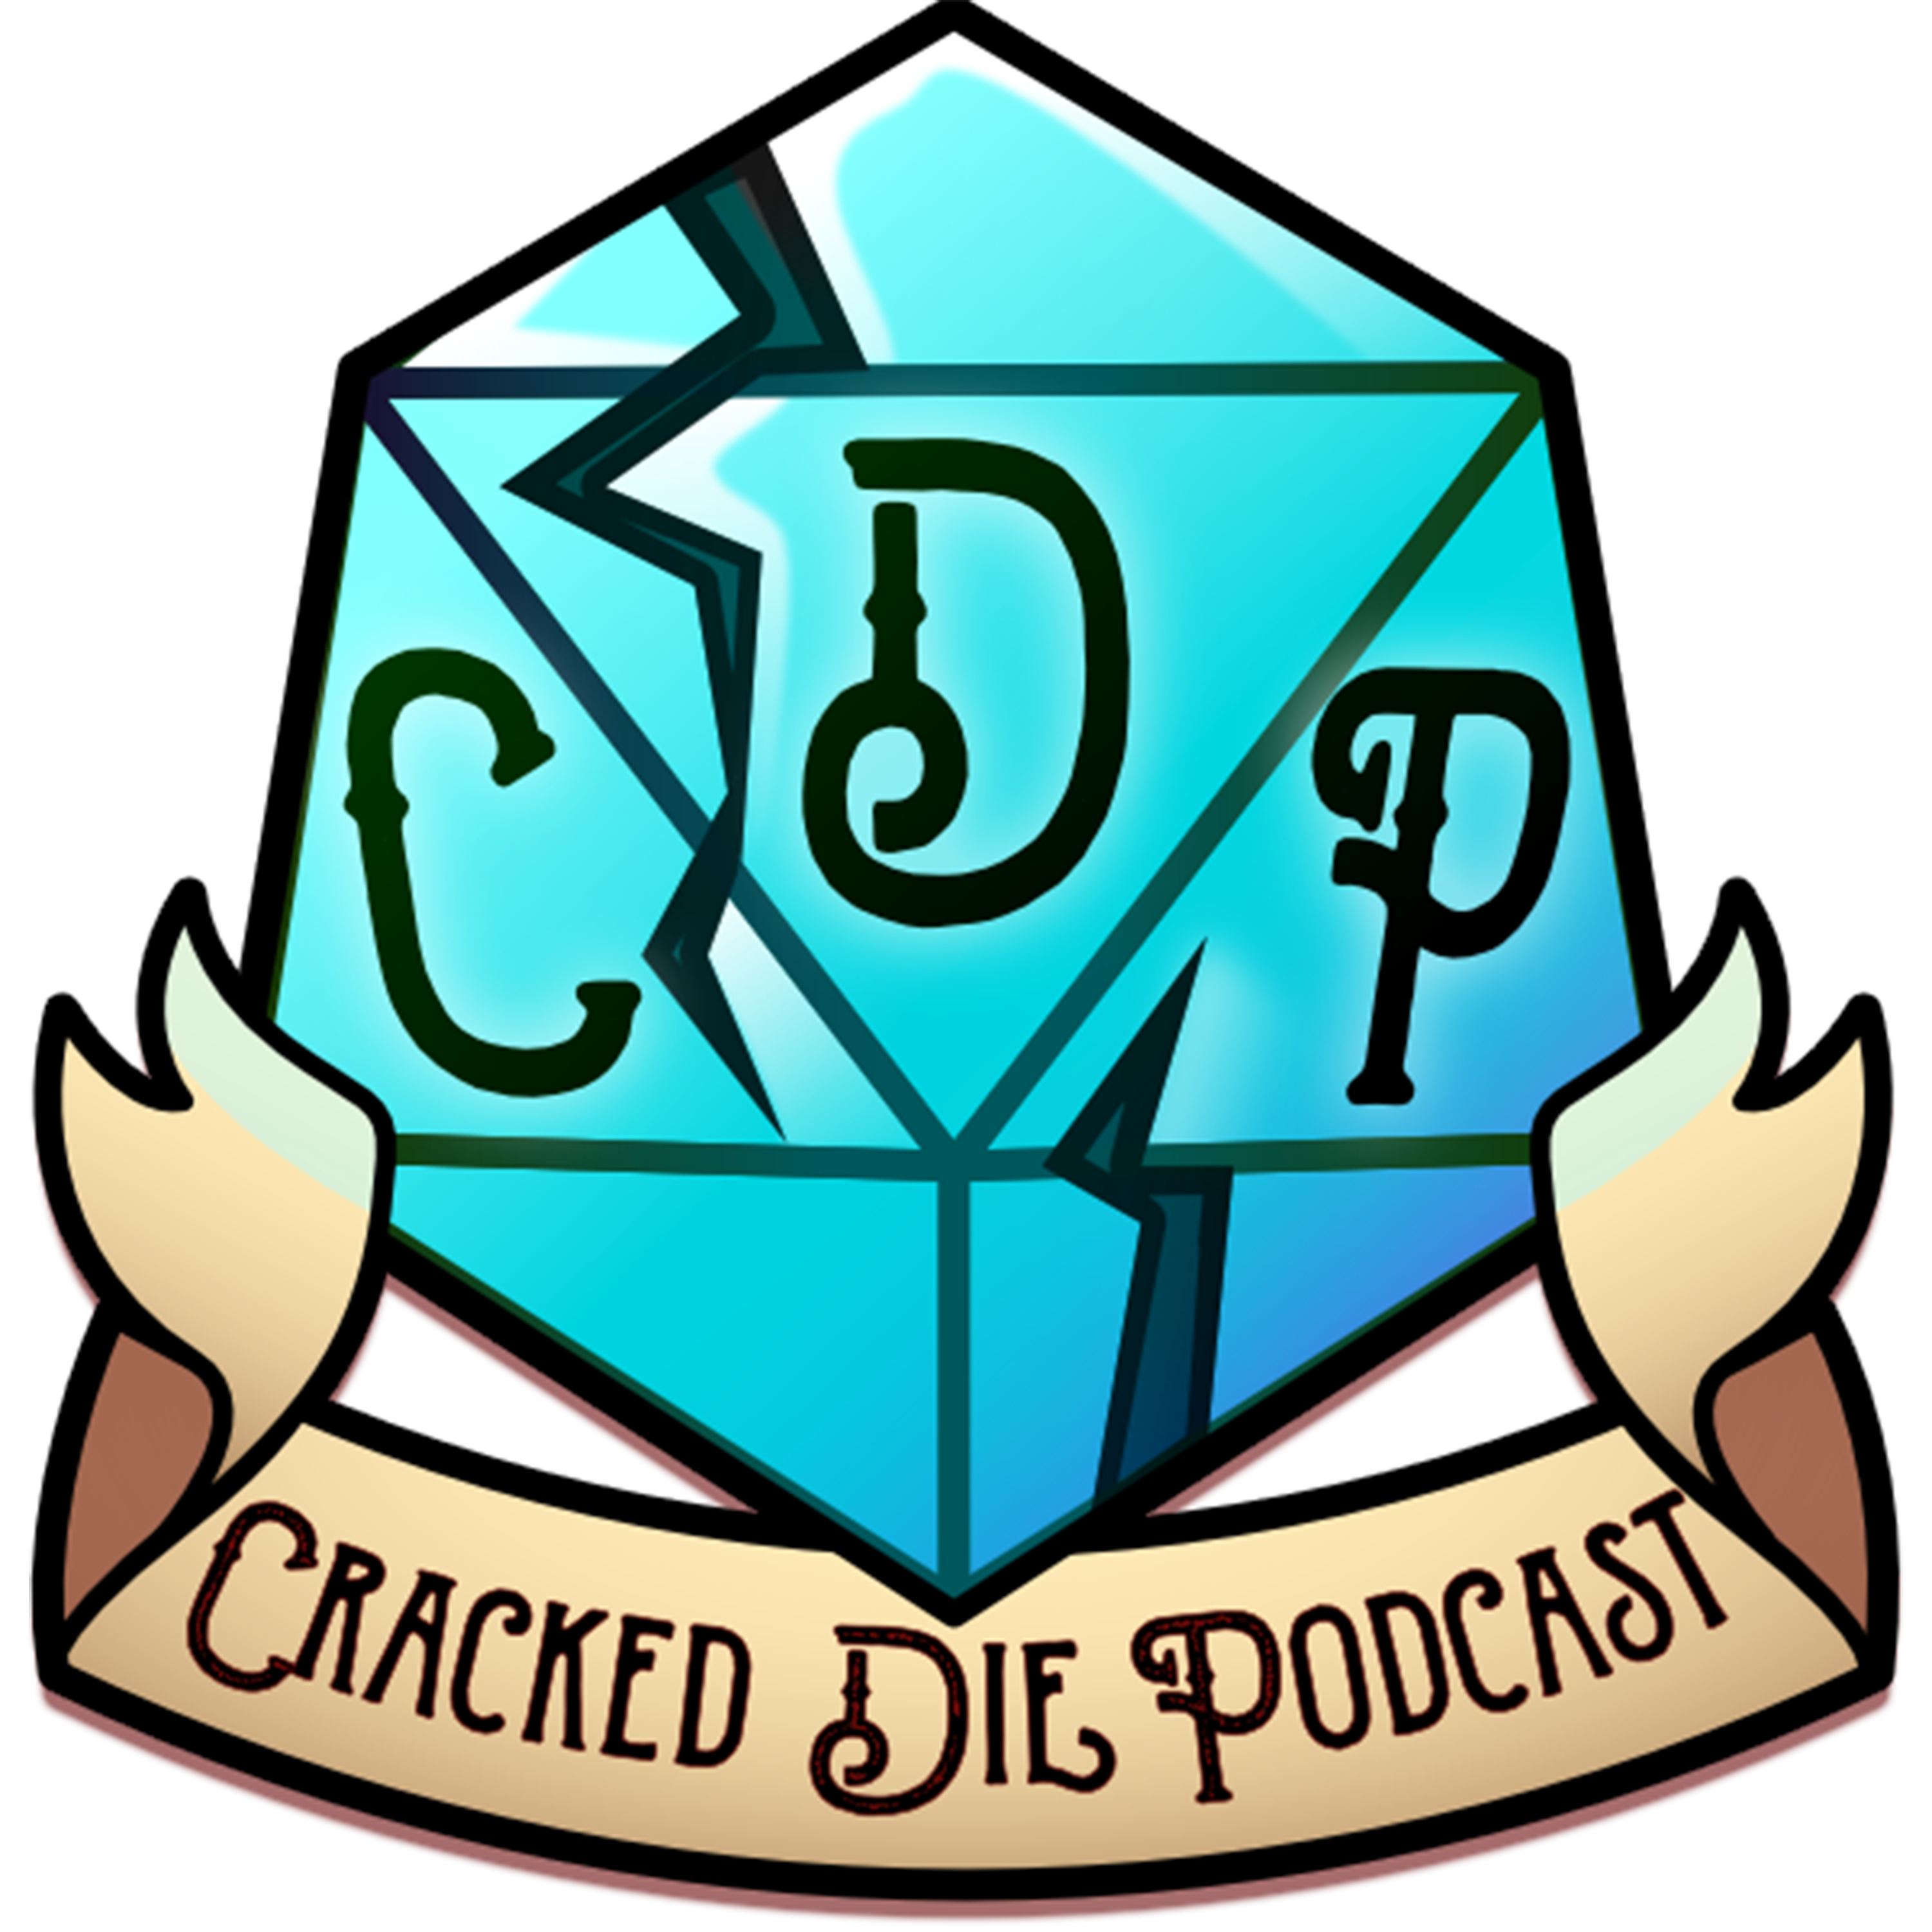 The Cracked Die Podcast - Episode 29 - What a Feeling